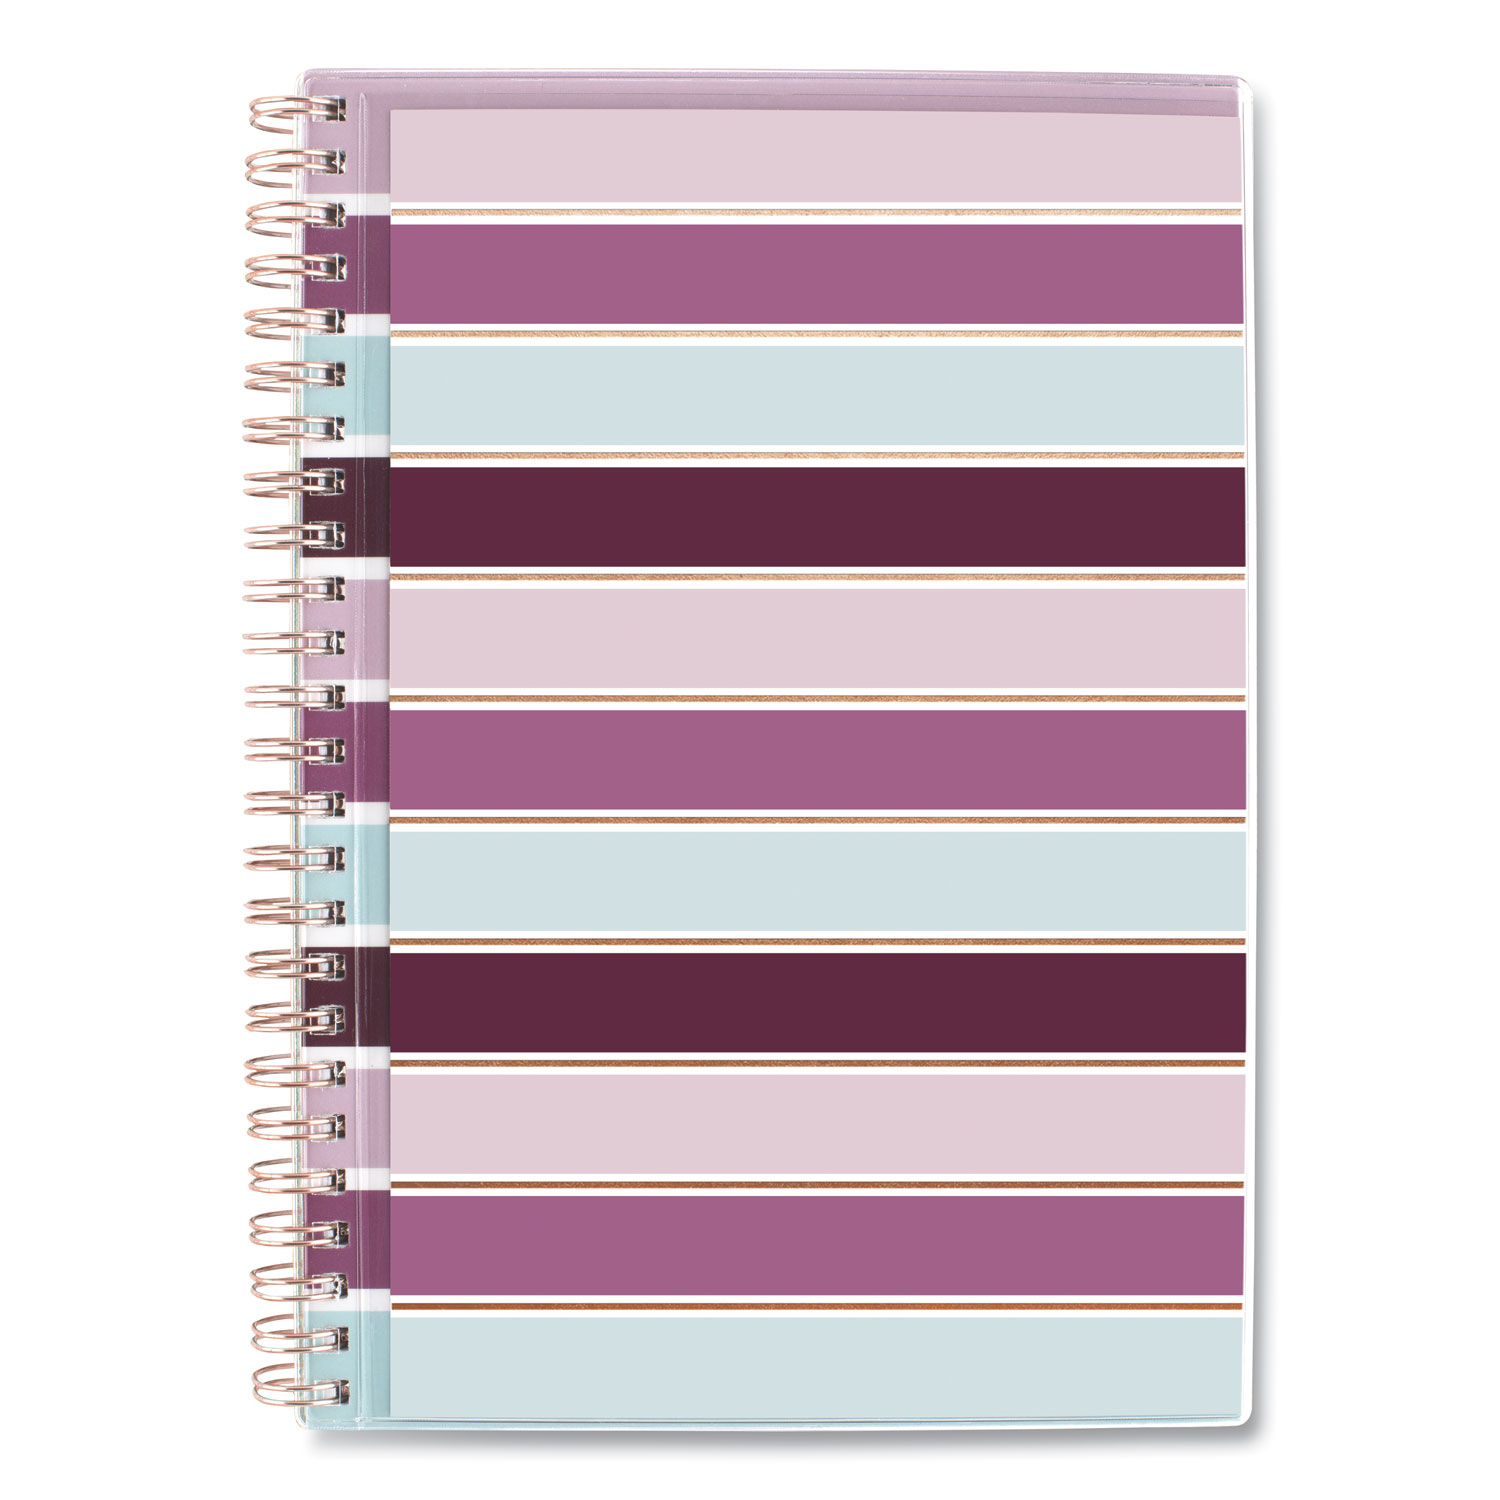 Cambridge® Ribbon Weekly/Monthly Planner, 8.5 x 5.5, Burgundy/Pink/Blue/White Striped, 2021